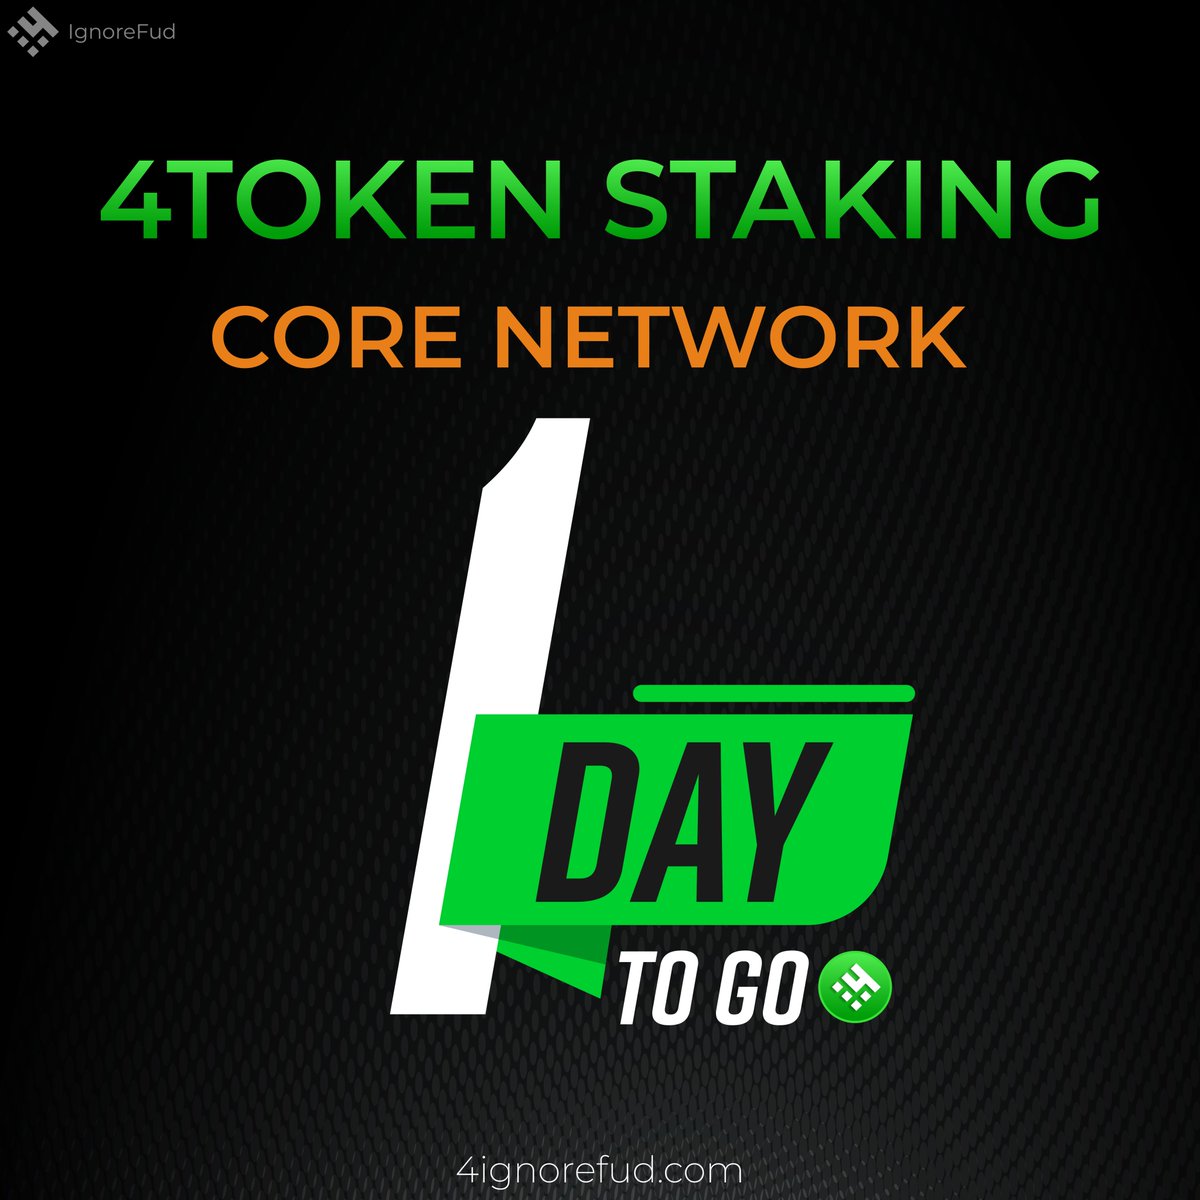 🎉Great News CORE Network Users💚

1 DAY TO GO! Staking Pools will open on June 18 | 10AM UTC

Giveaway 100k $4TOKEN (1 winner)
✅Follow + RT  #4TOKEN
✅Tag 3 Friends

#4TOKEN #memecoin #1000x #CORE